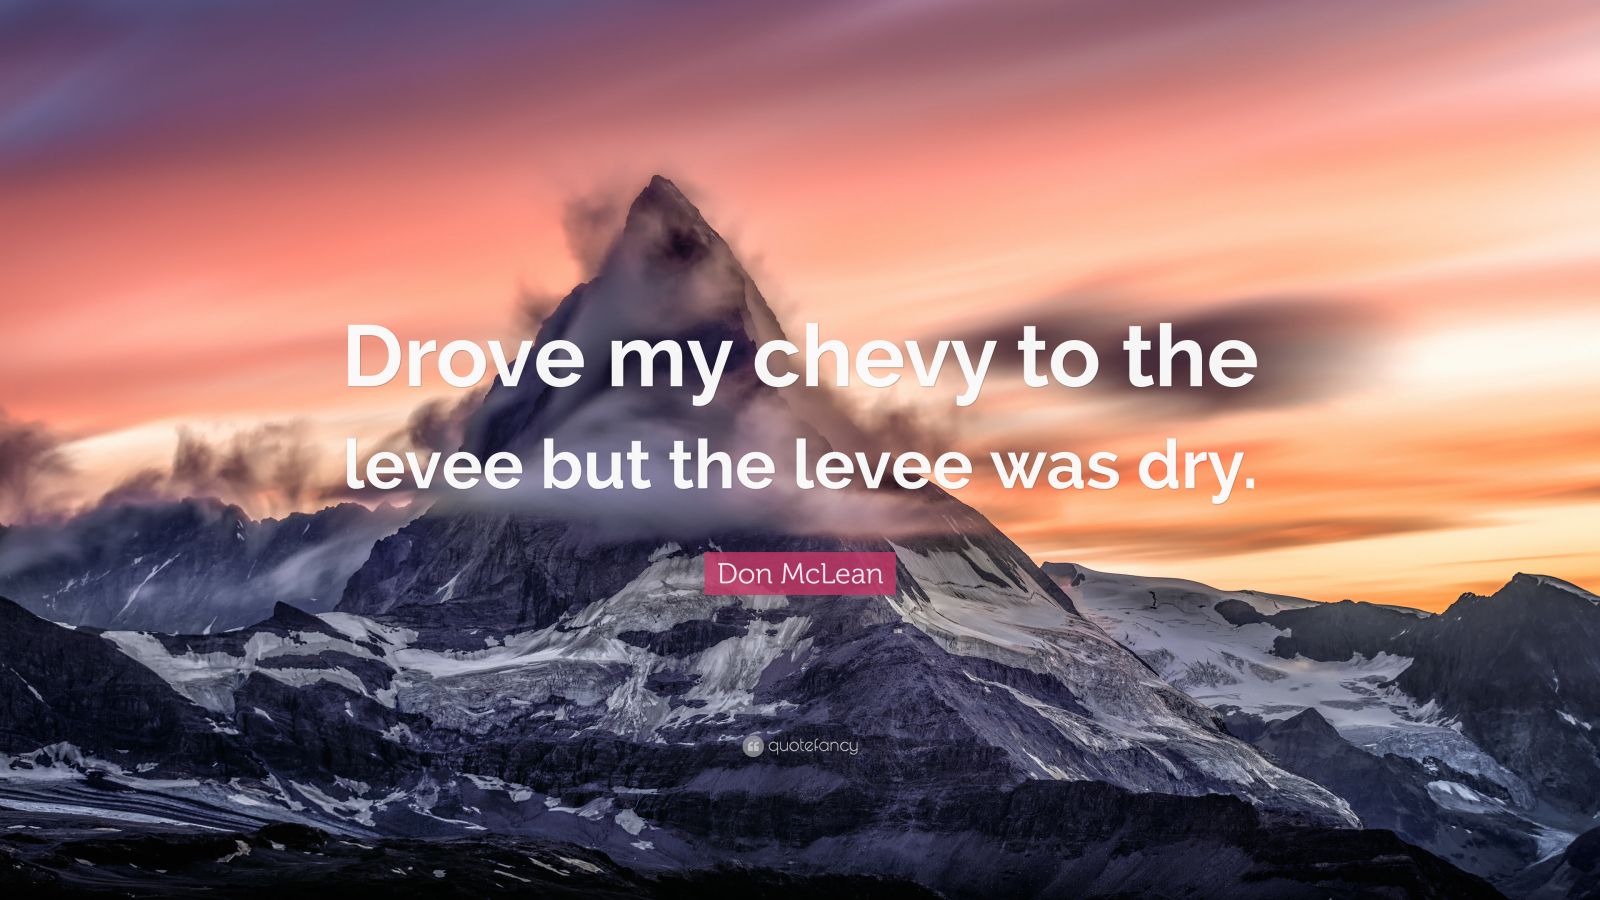 Don McLean Quote: “Drove my to the levee but levee dry.”